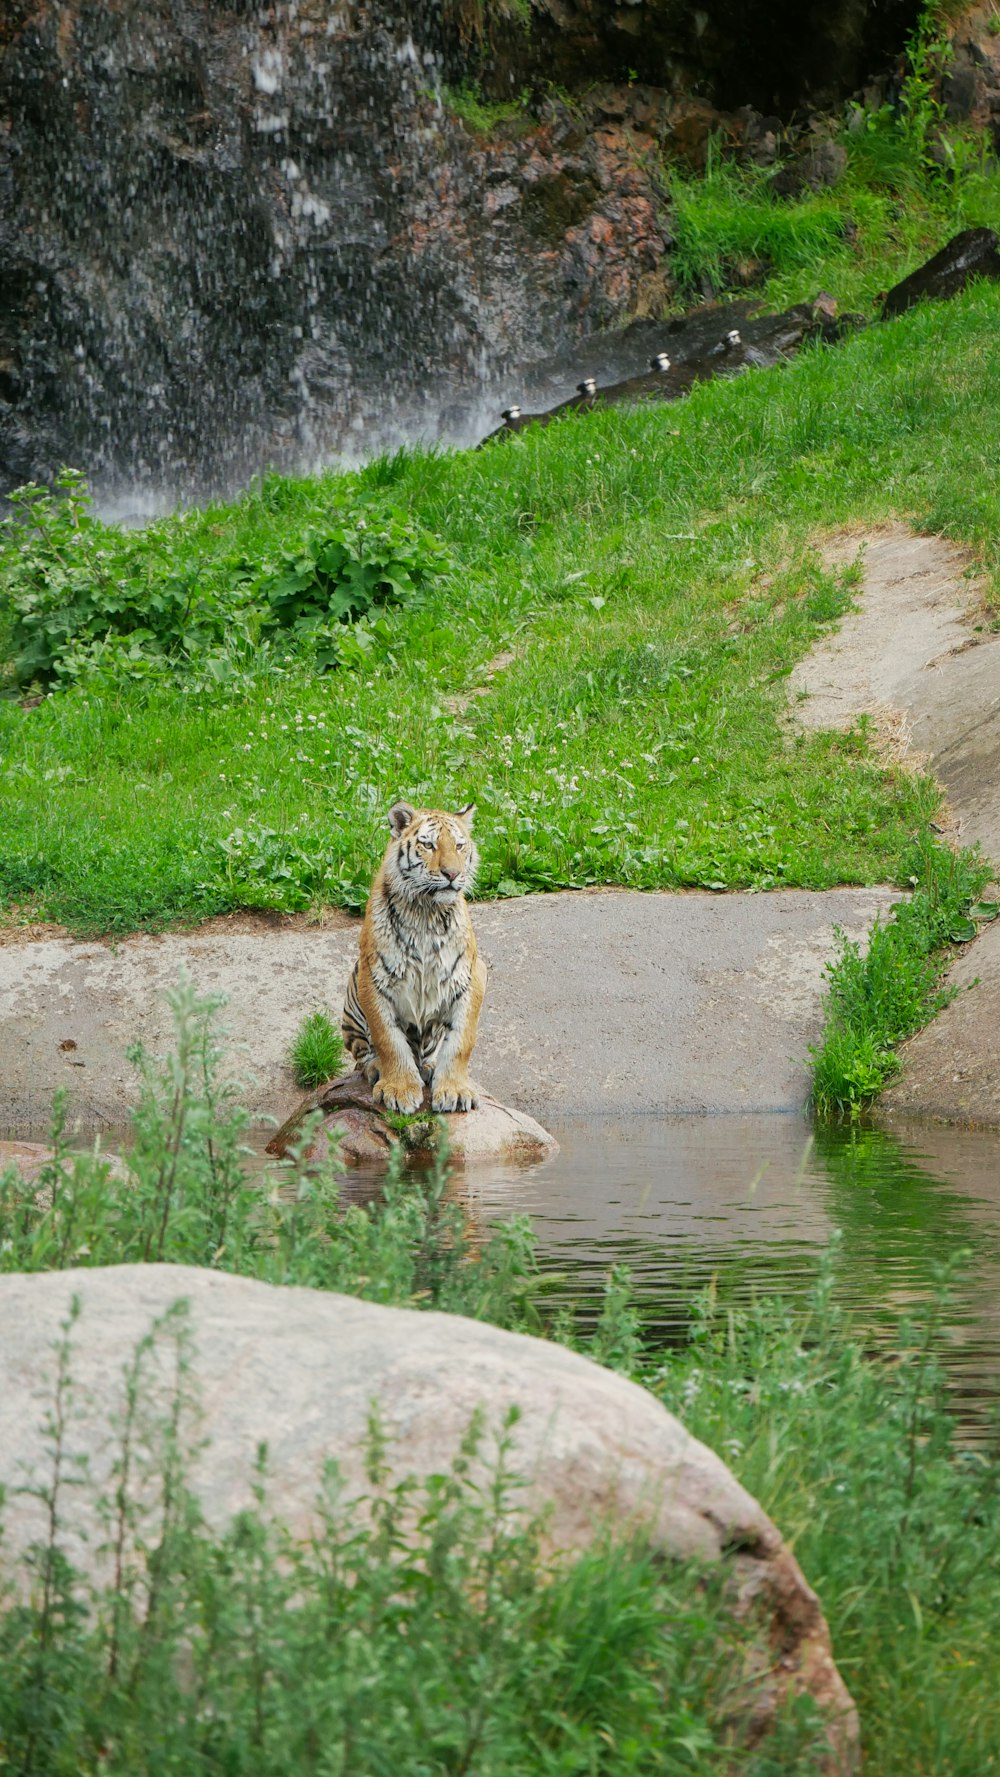 a tiger sitting on a rock